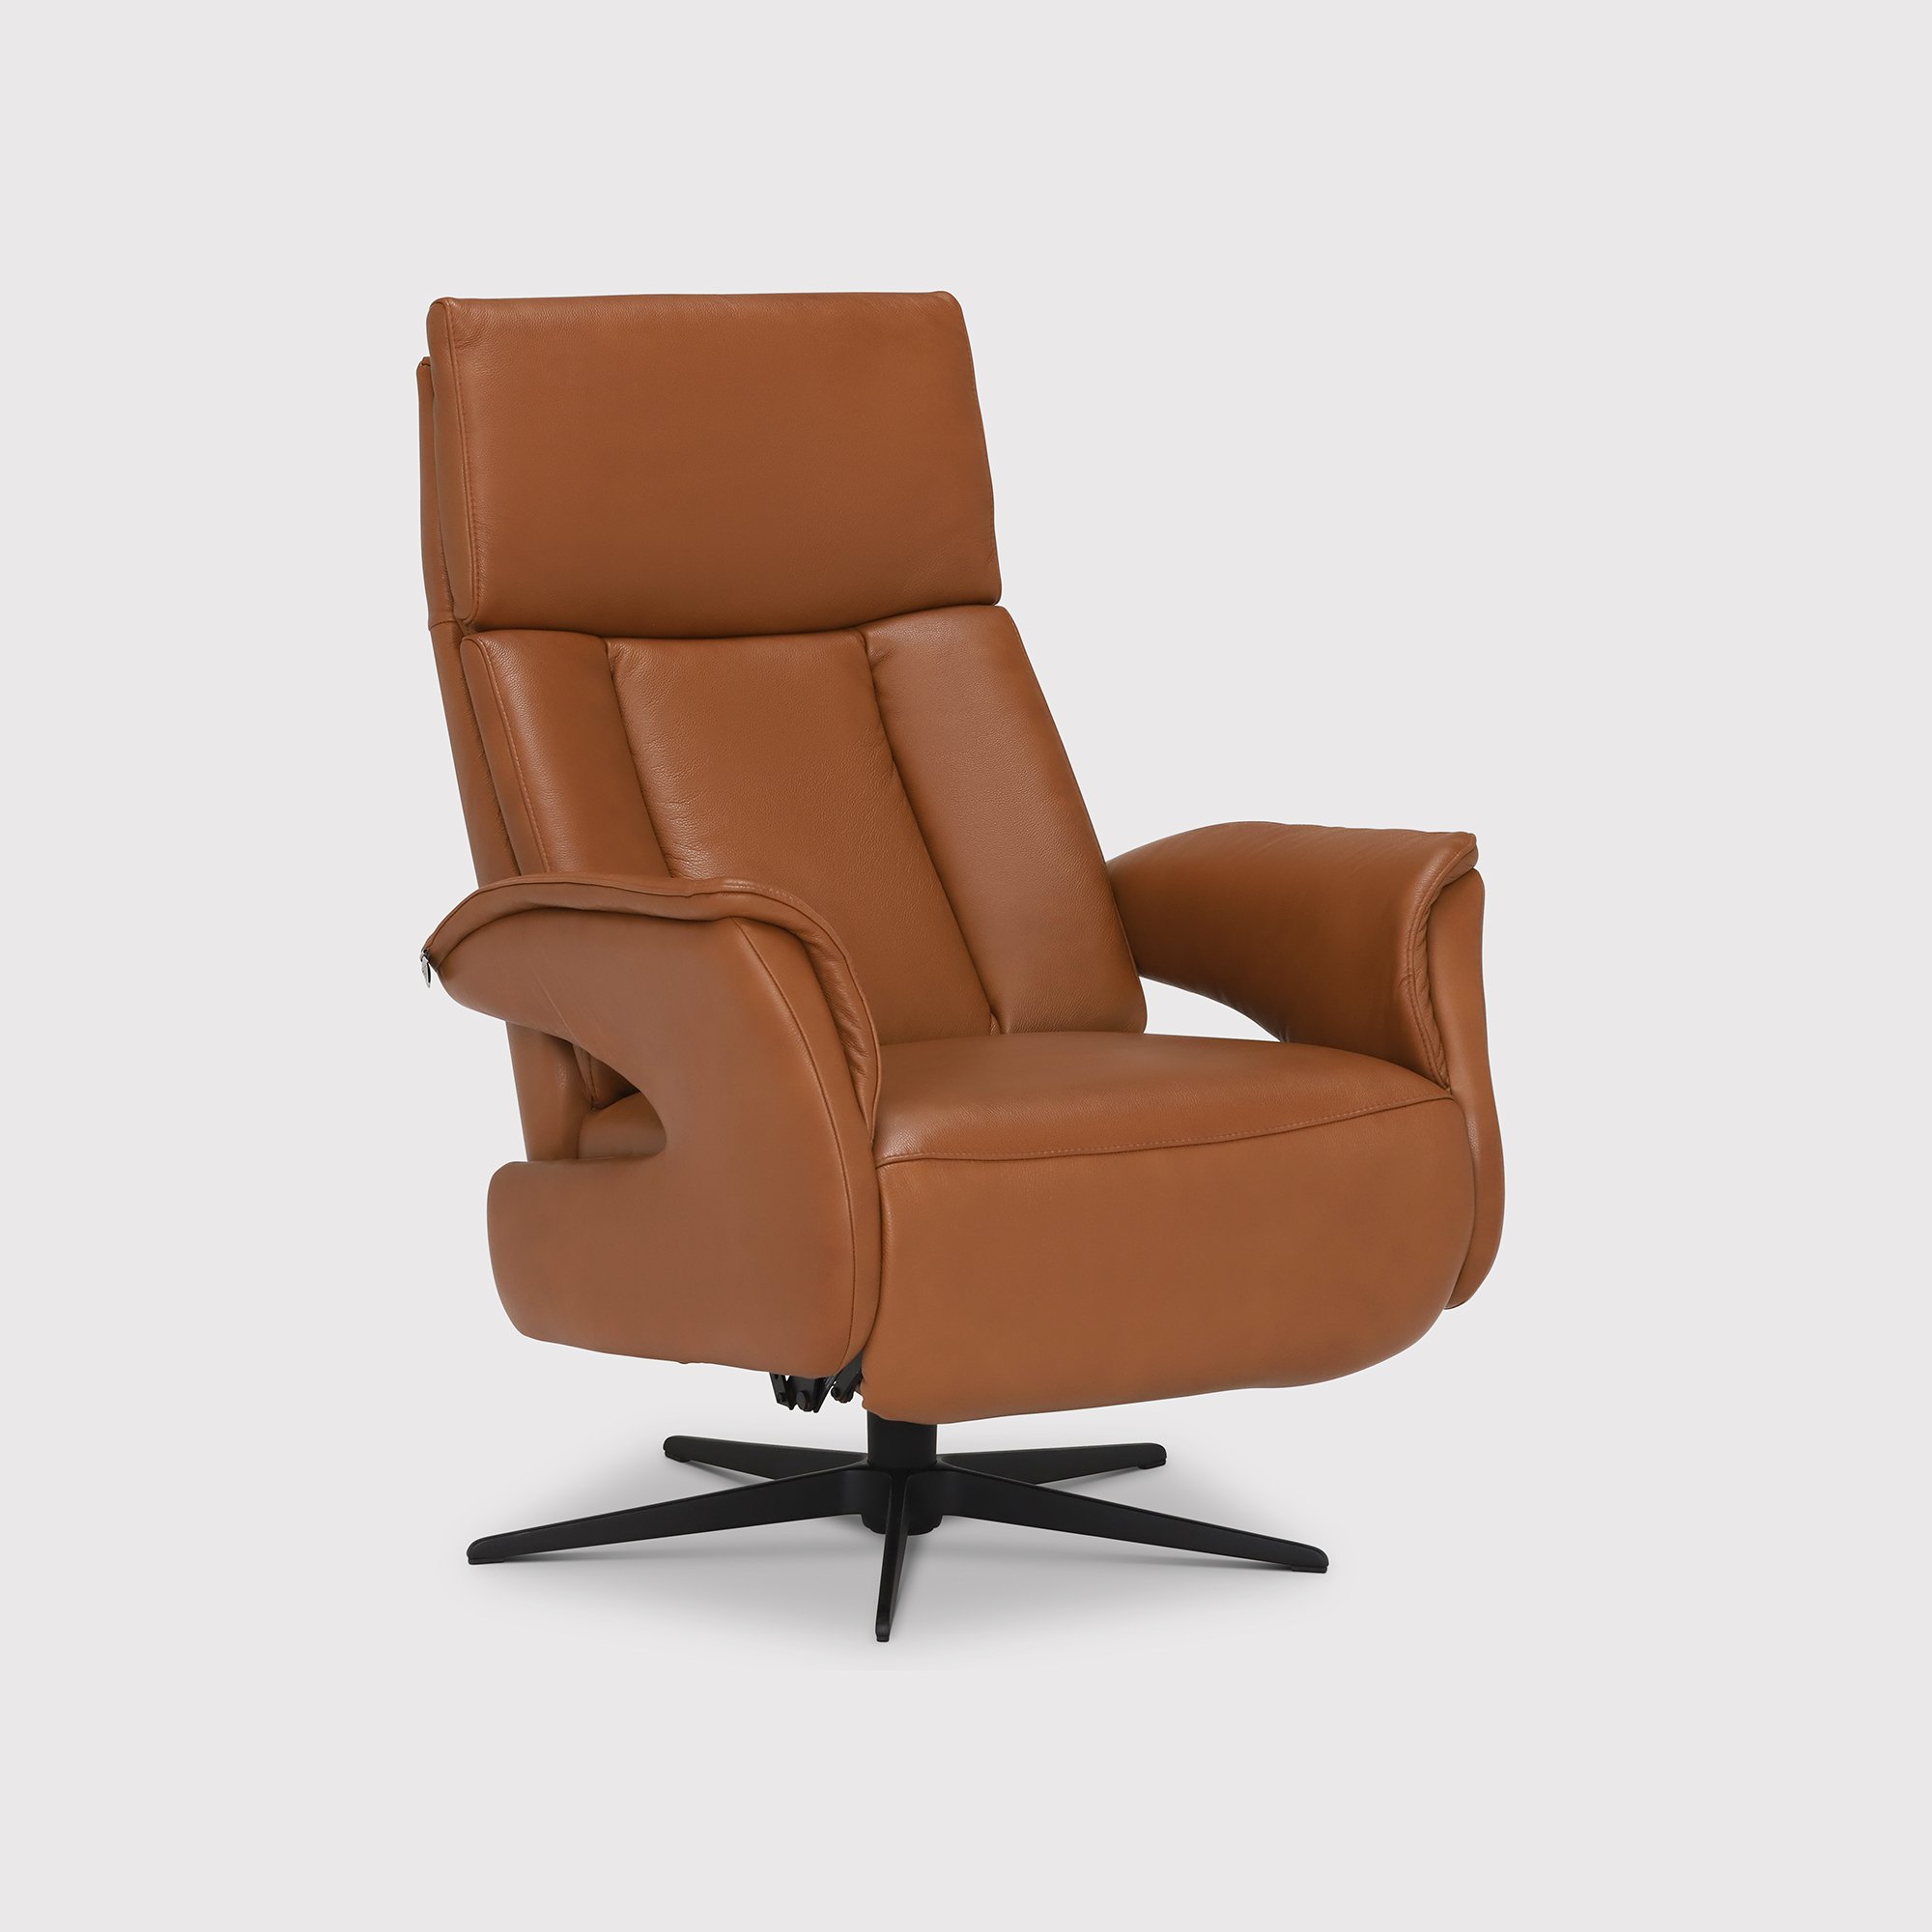 Pim Medium Manual Reclining Recliner Chair With Base D, Brown Leather | Barker & Stonehouse